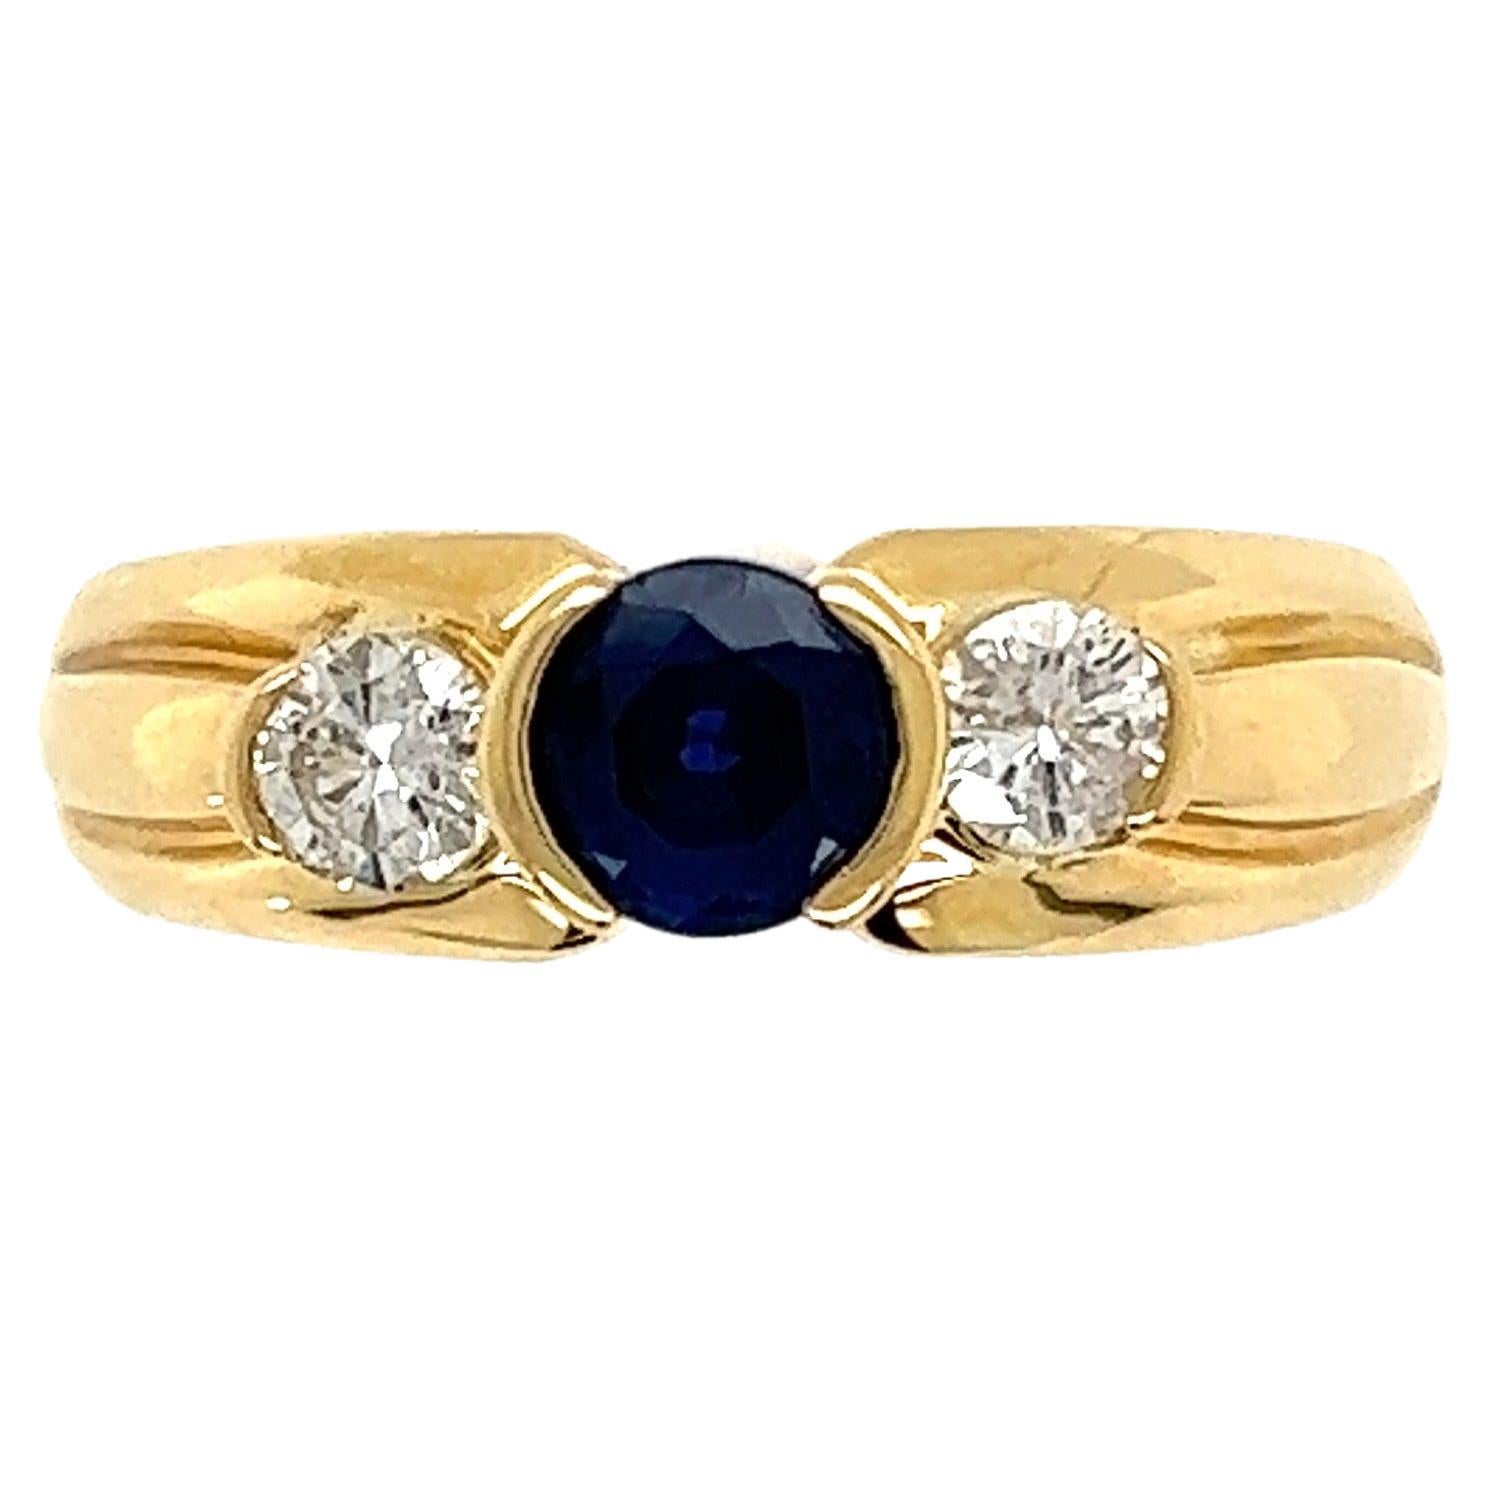 3-Stone Sapphire and Diamond Gold Art Deco Revival Band Ring Fine Estate Jewelry For Sale